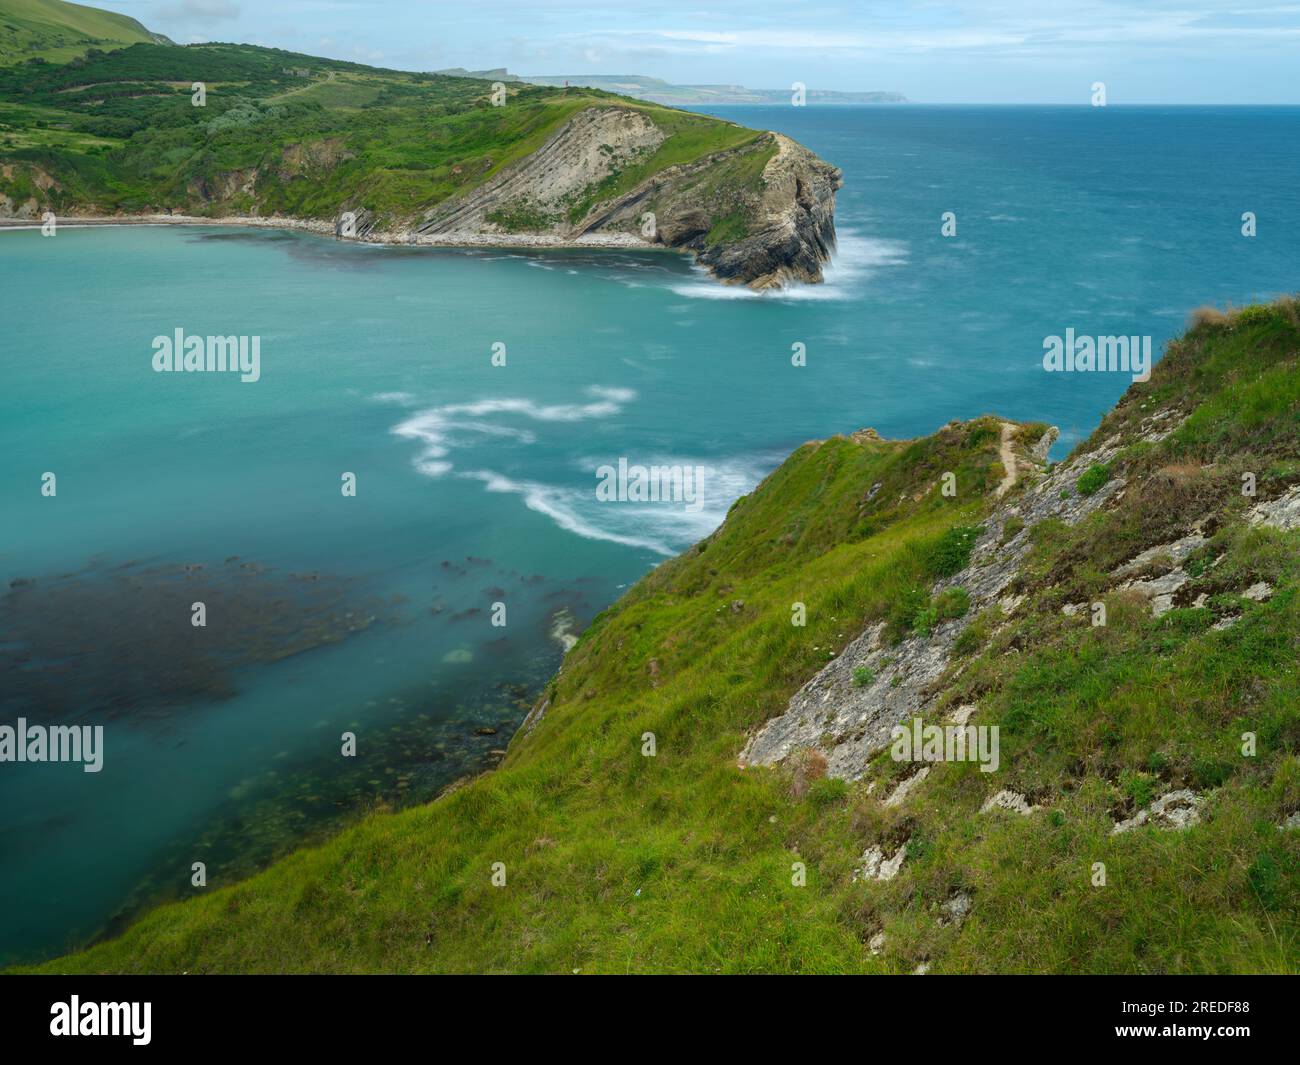 The entrance to Lulworth Cove on the Jurassic Coast in Dorset, England. Stock Photo